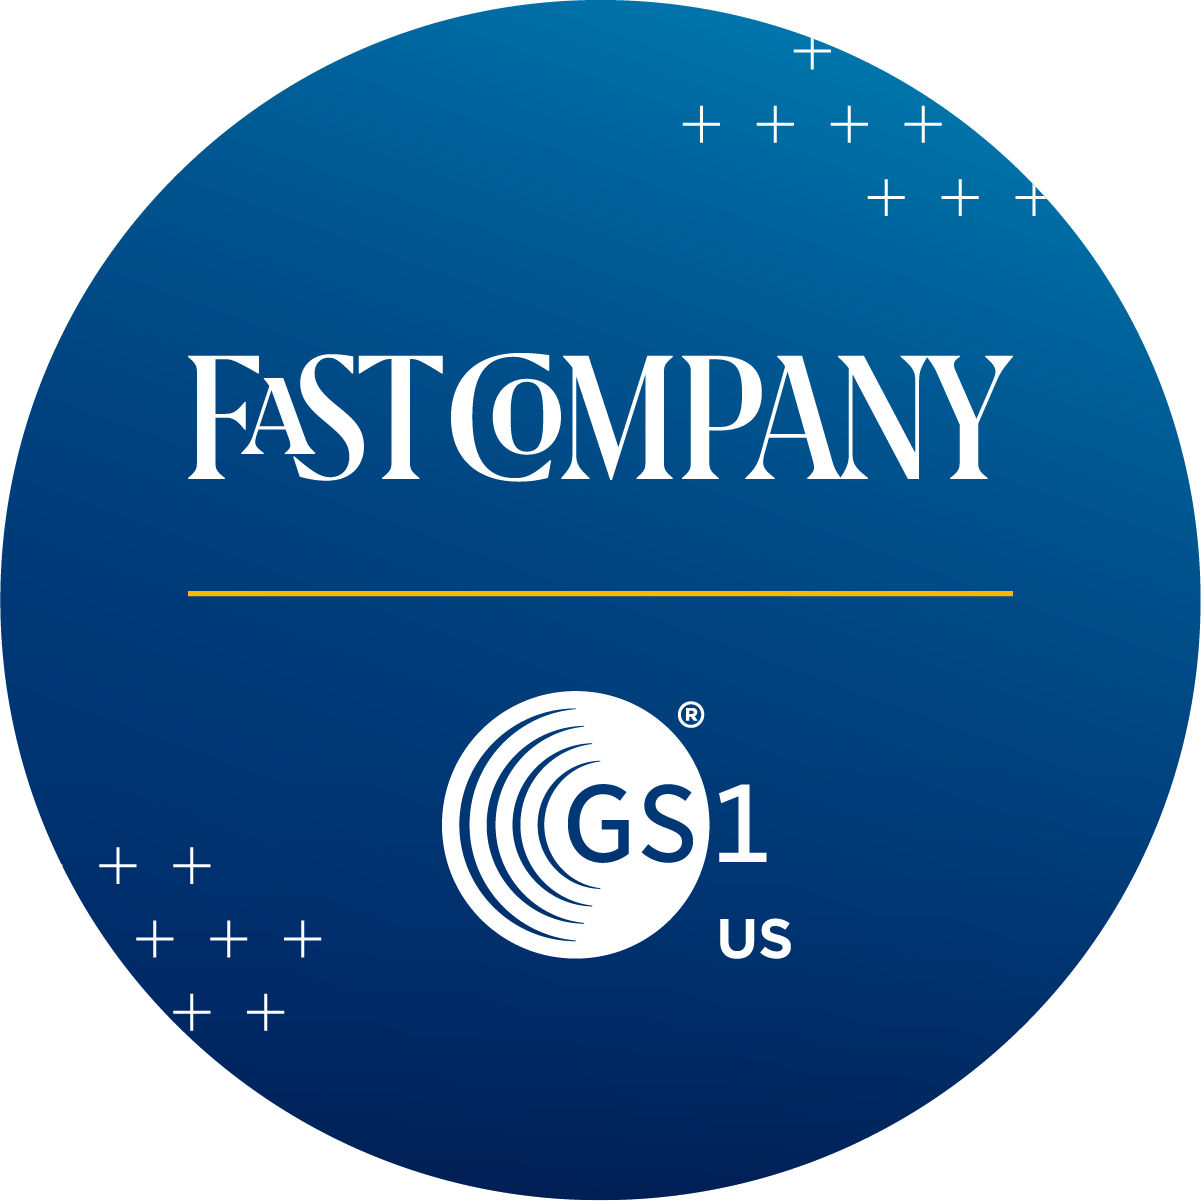 Fast Company and GS1 US Logos